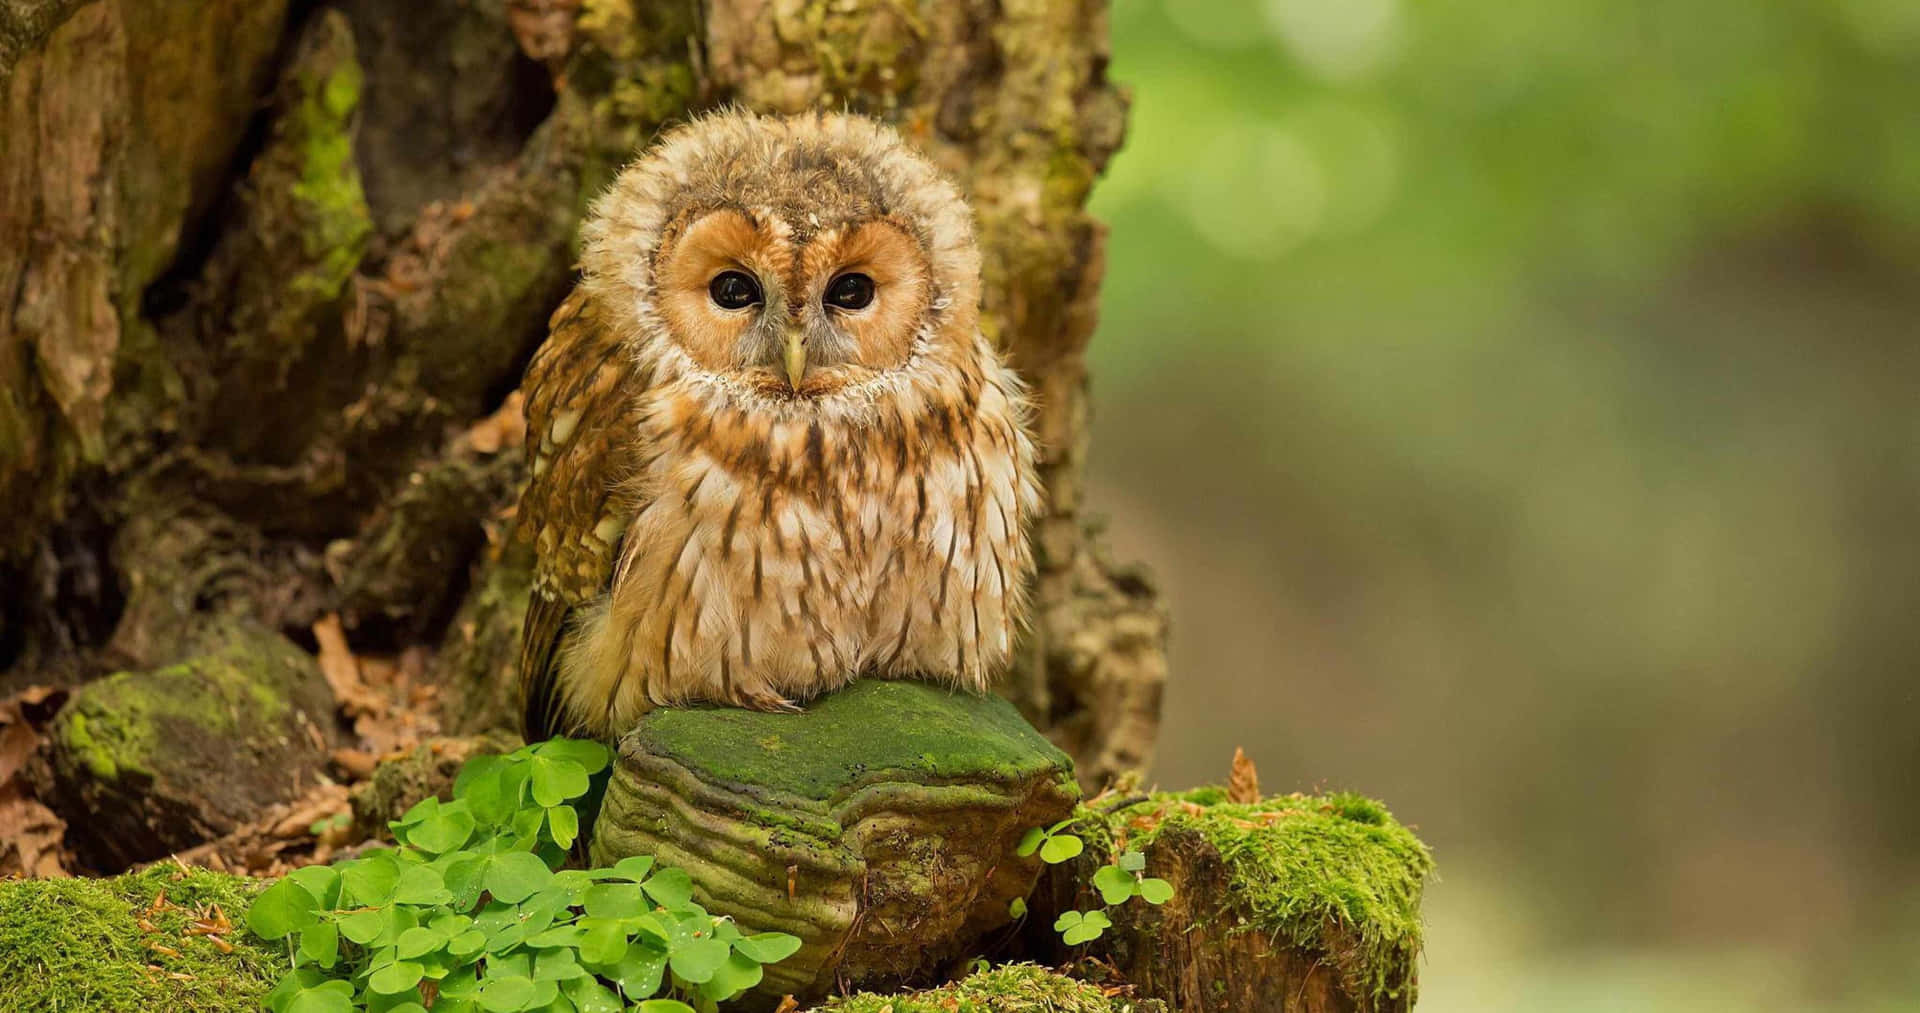 A baby owl perched atop a branch